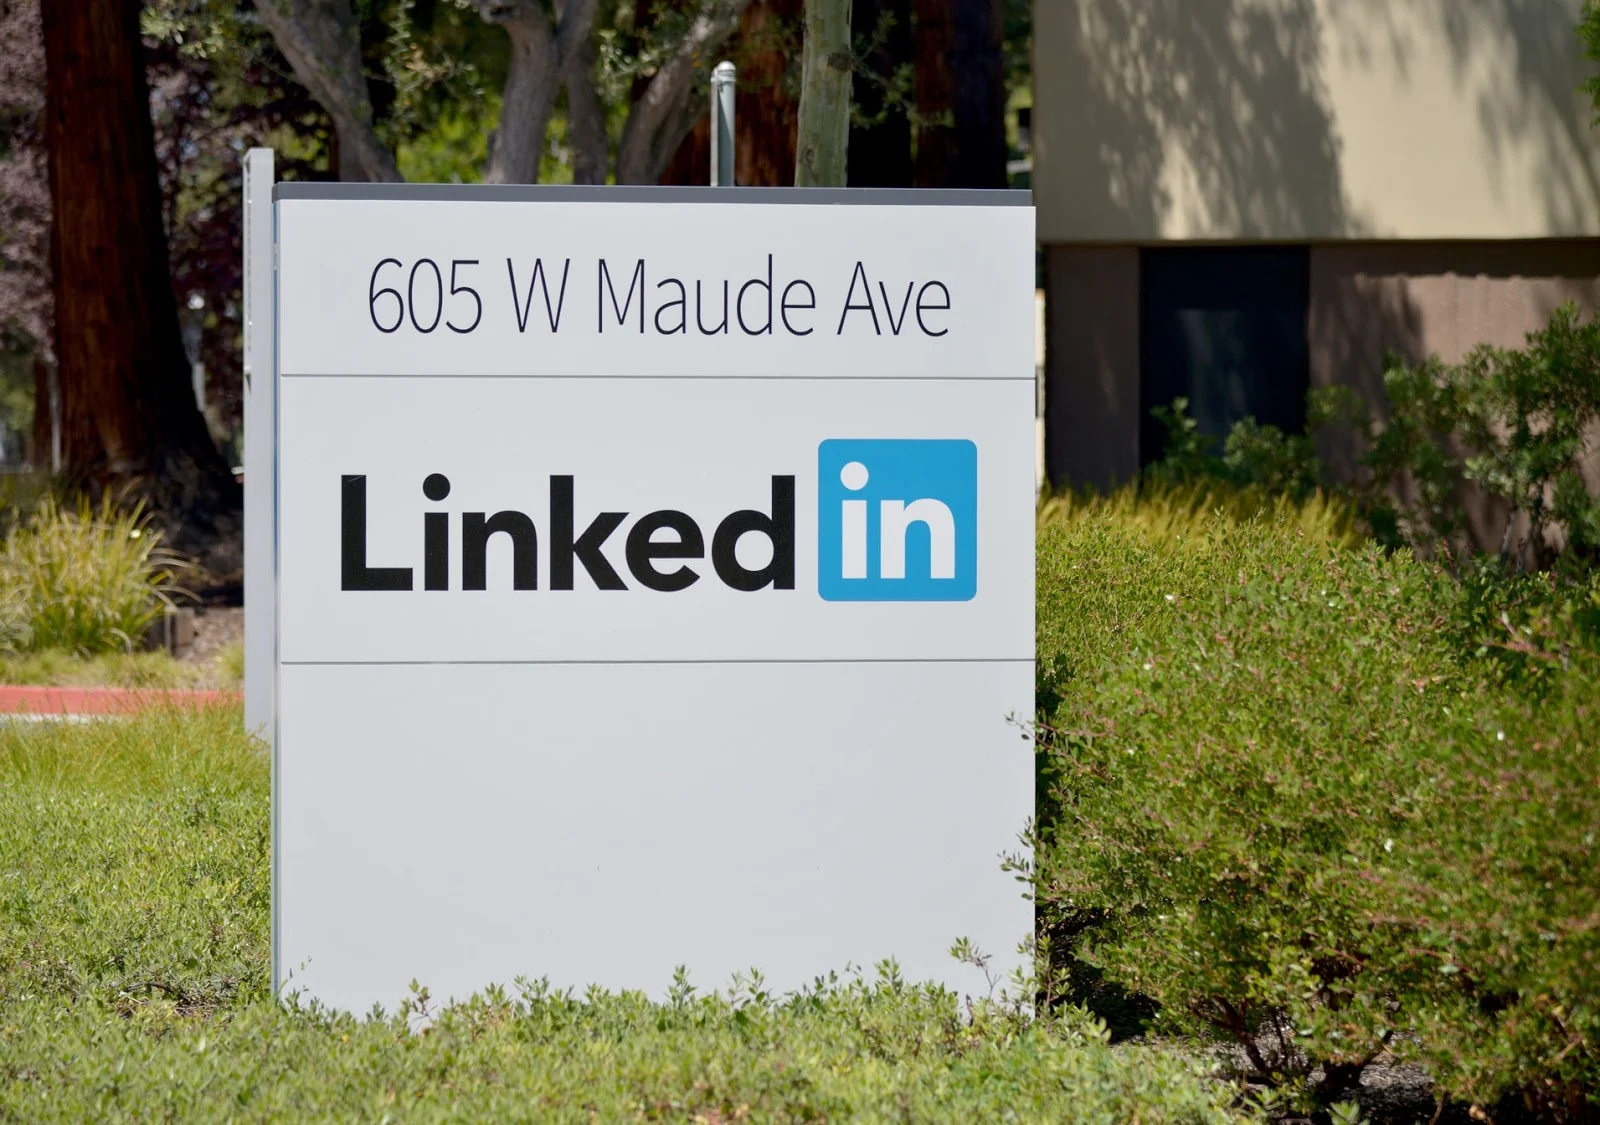 Microsoft’s Q4 Report Shows That the Revenue of LinkedIn Increased 10 Percent, and Sessions Grew 27 Percent